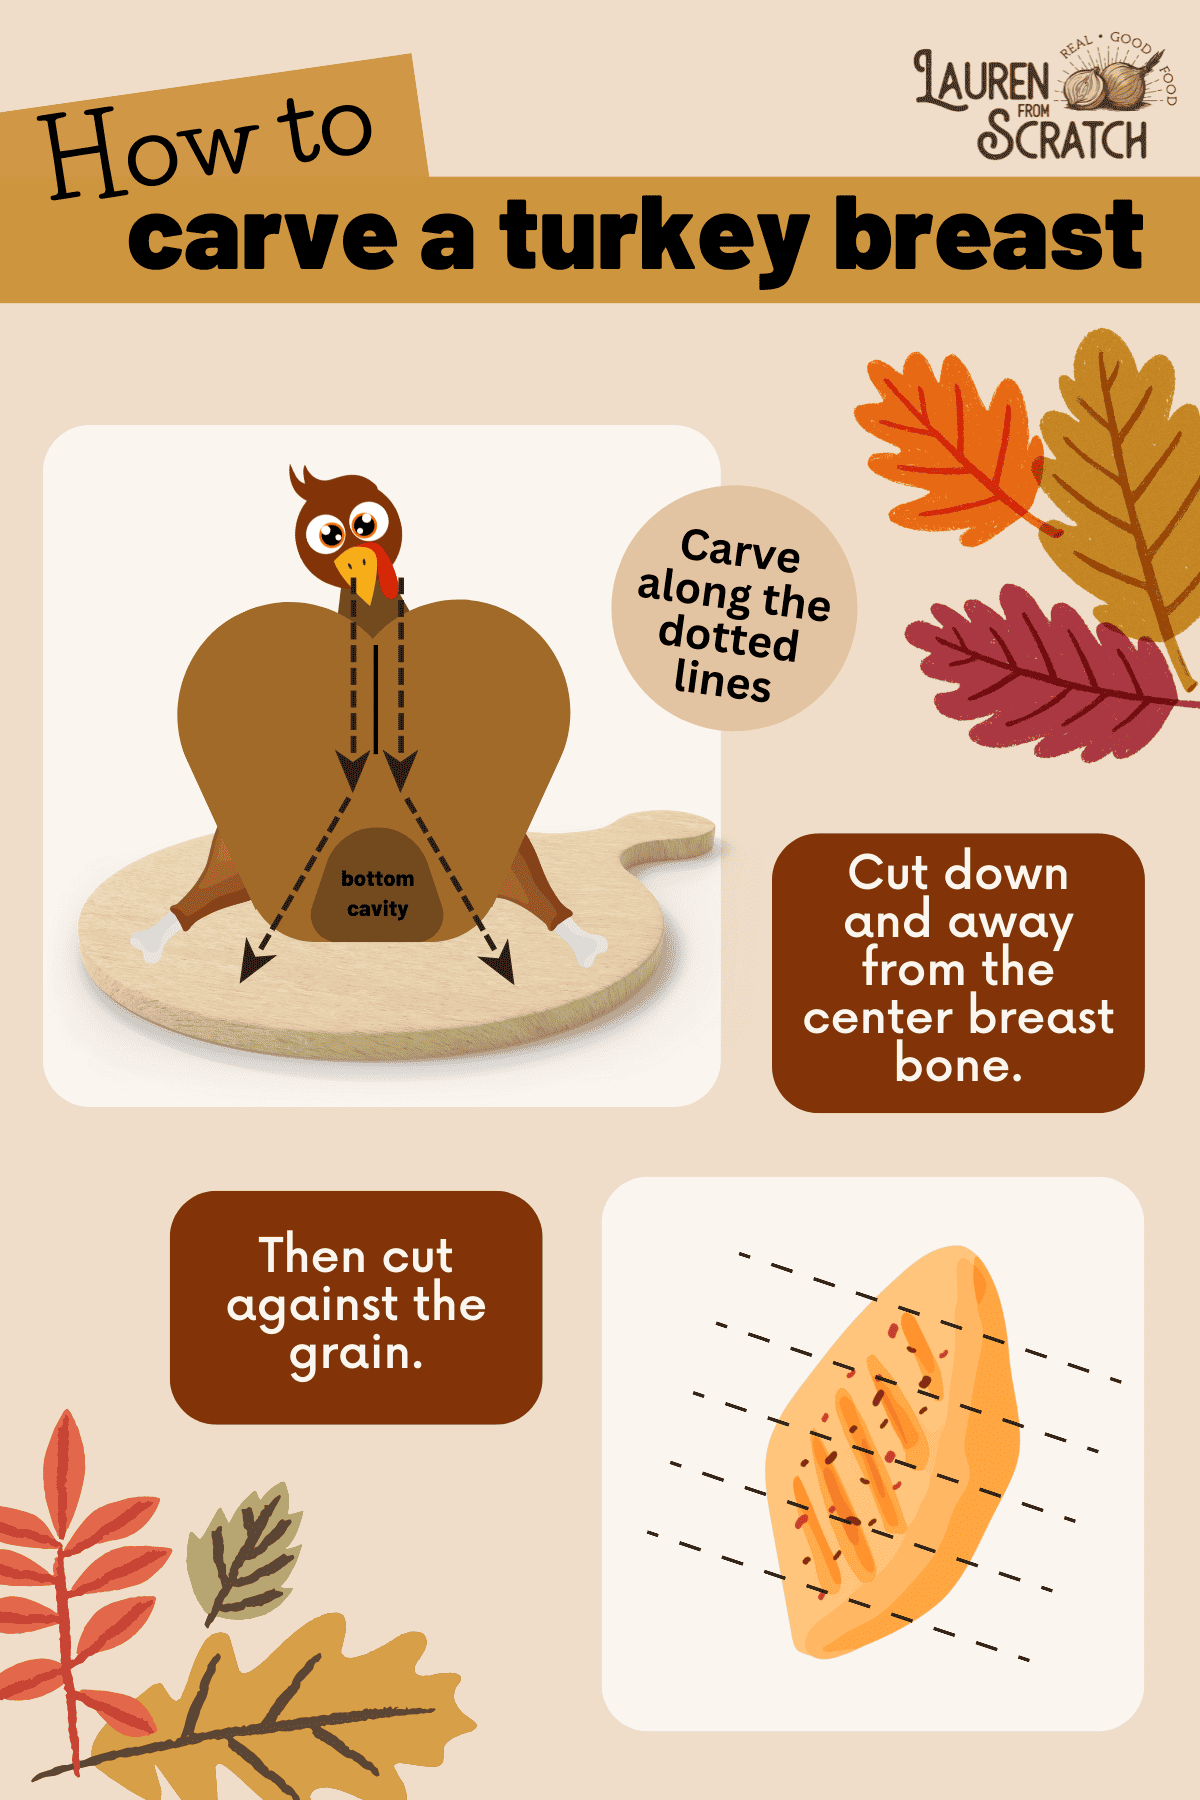 An infographic showing how to carve a turkey breast.